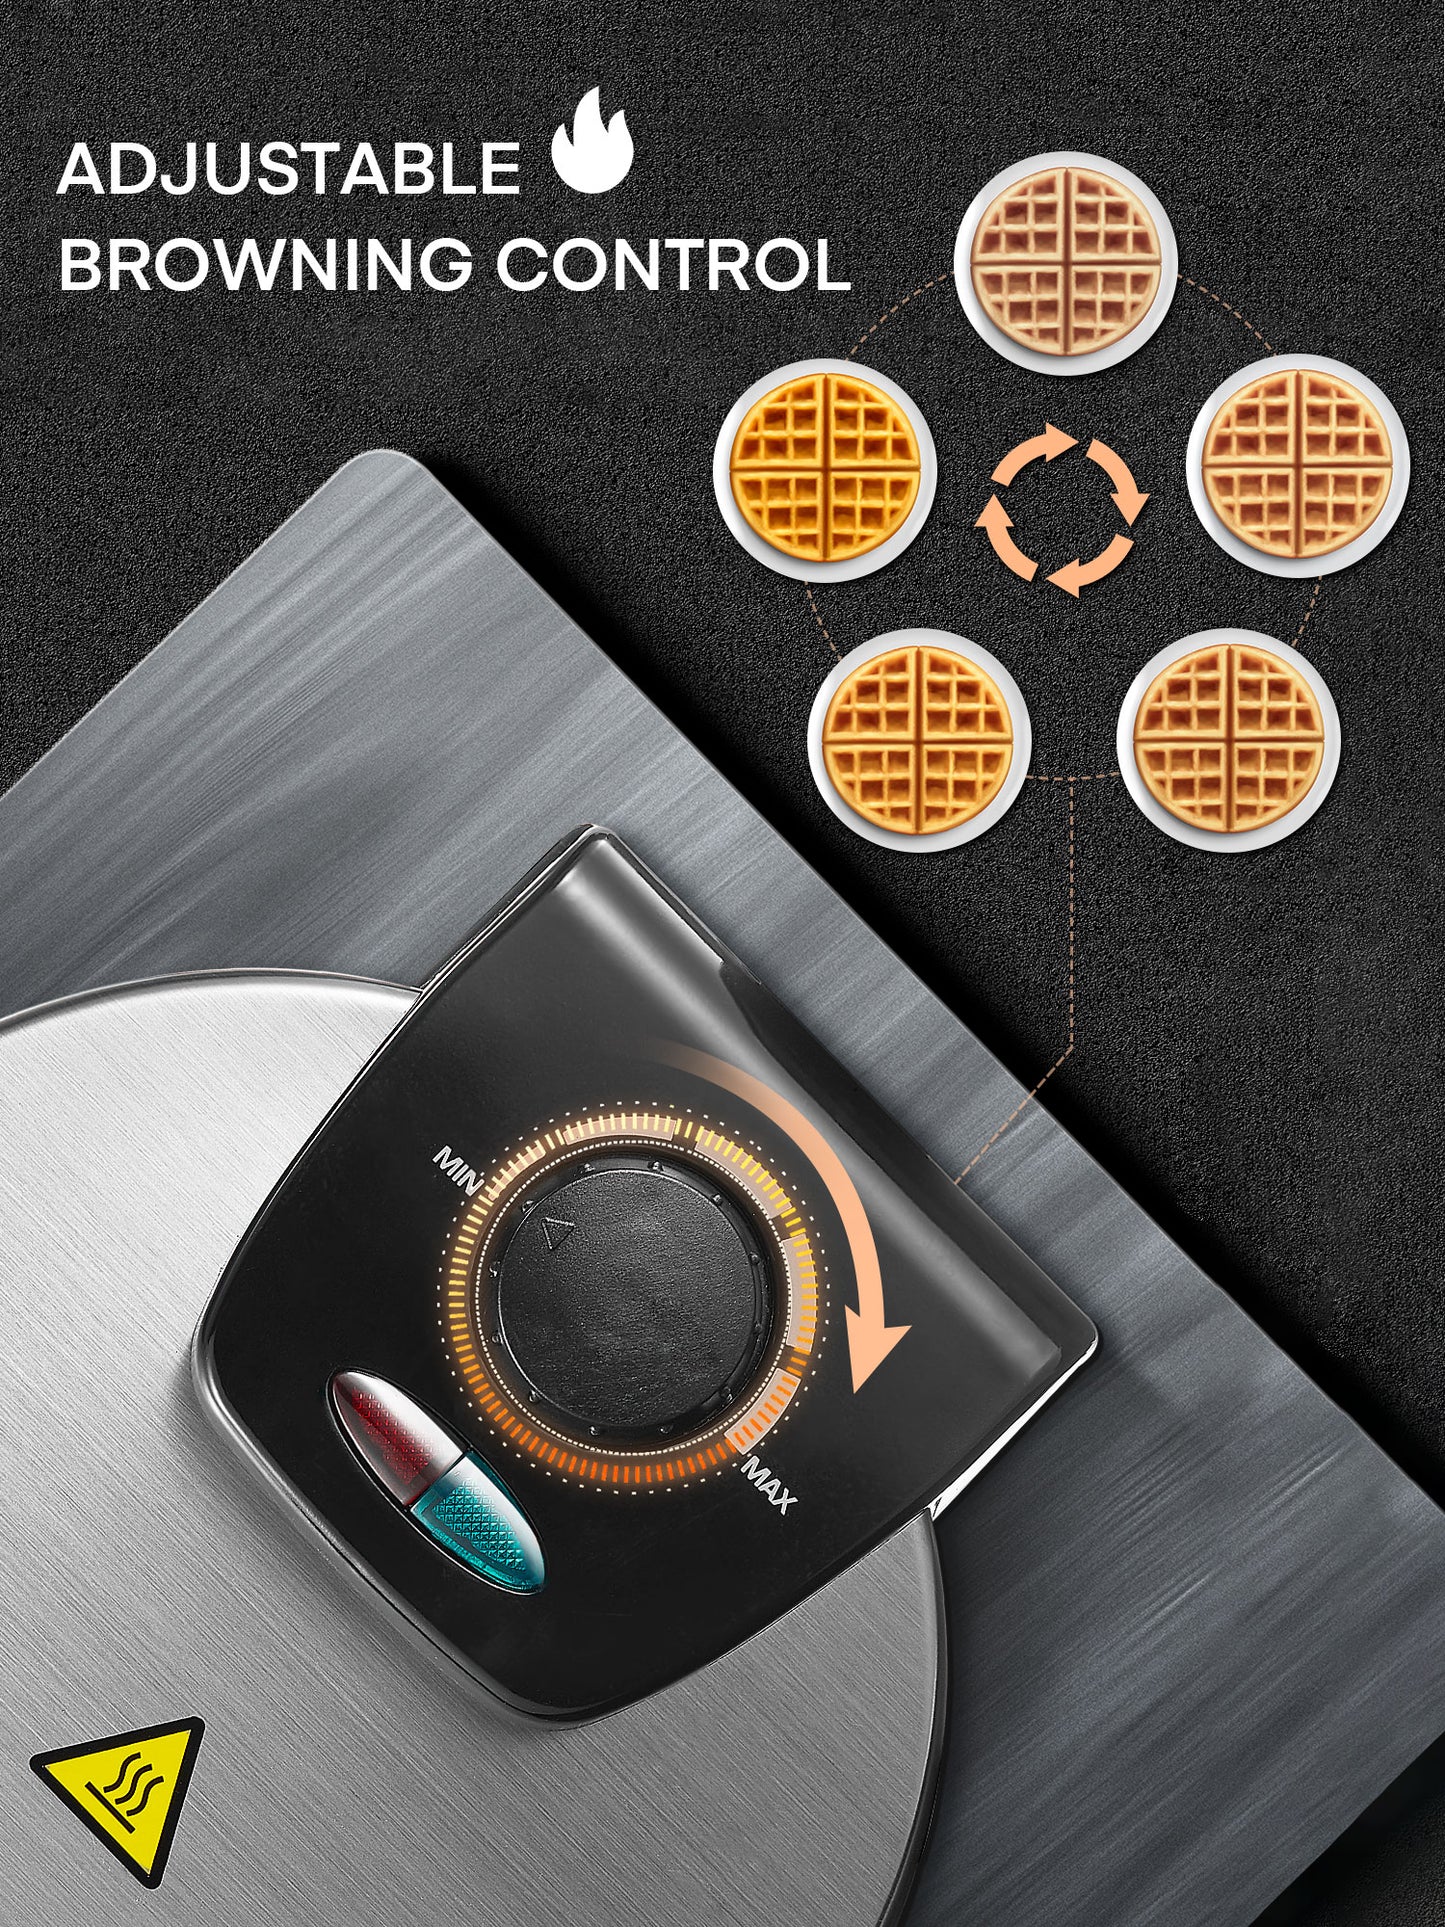 AICOOK 180° Flip Belgian Waffle Maker with Non Stick Grids, Adjustable Browning Temperature Control, Removable Drip Tray, 4-Slice Waffle Iron, Stainless Steel, Indicator Lights, Round Design, 1100W